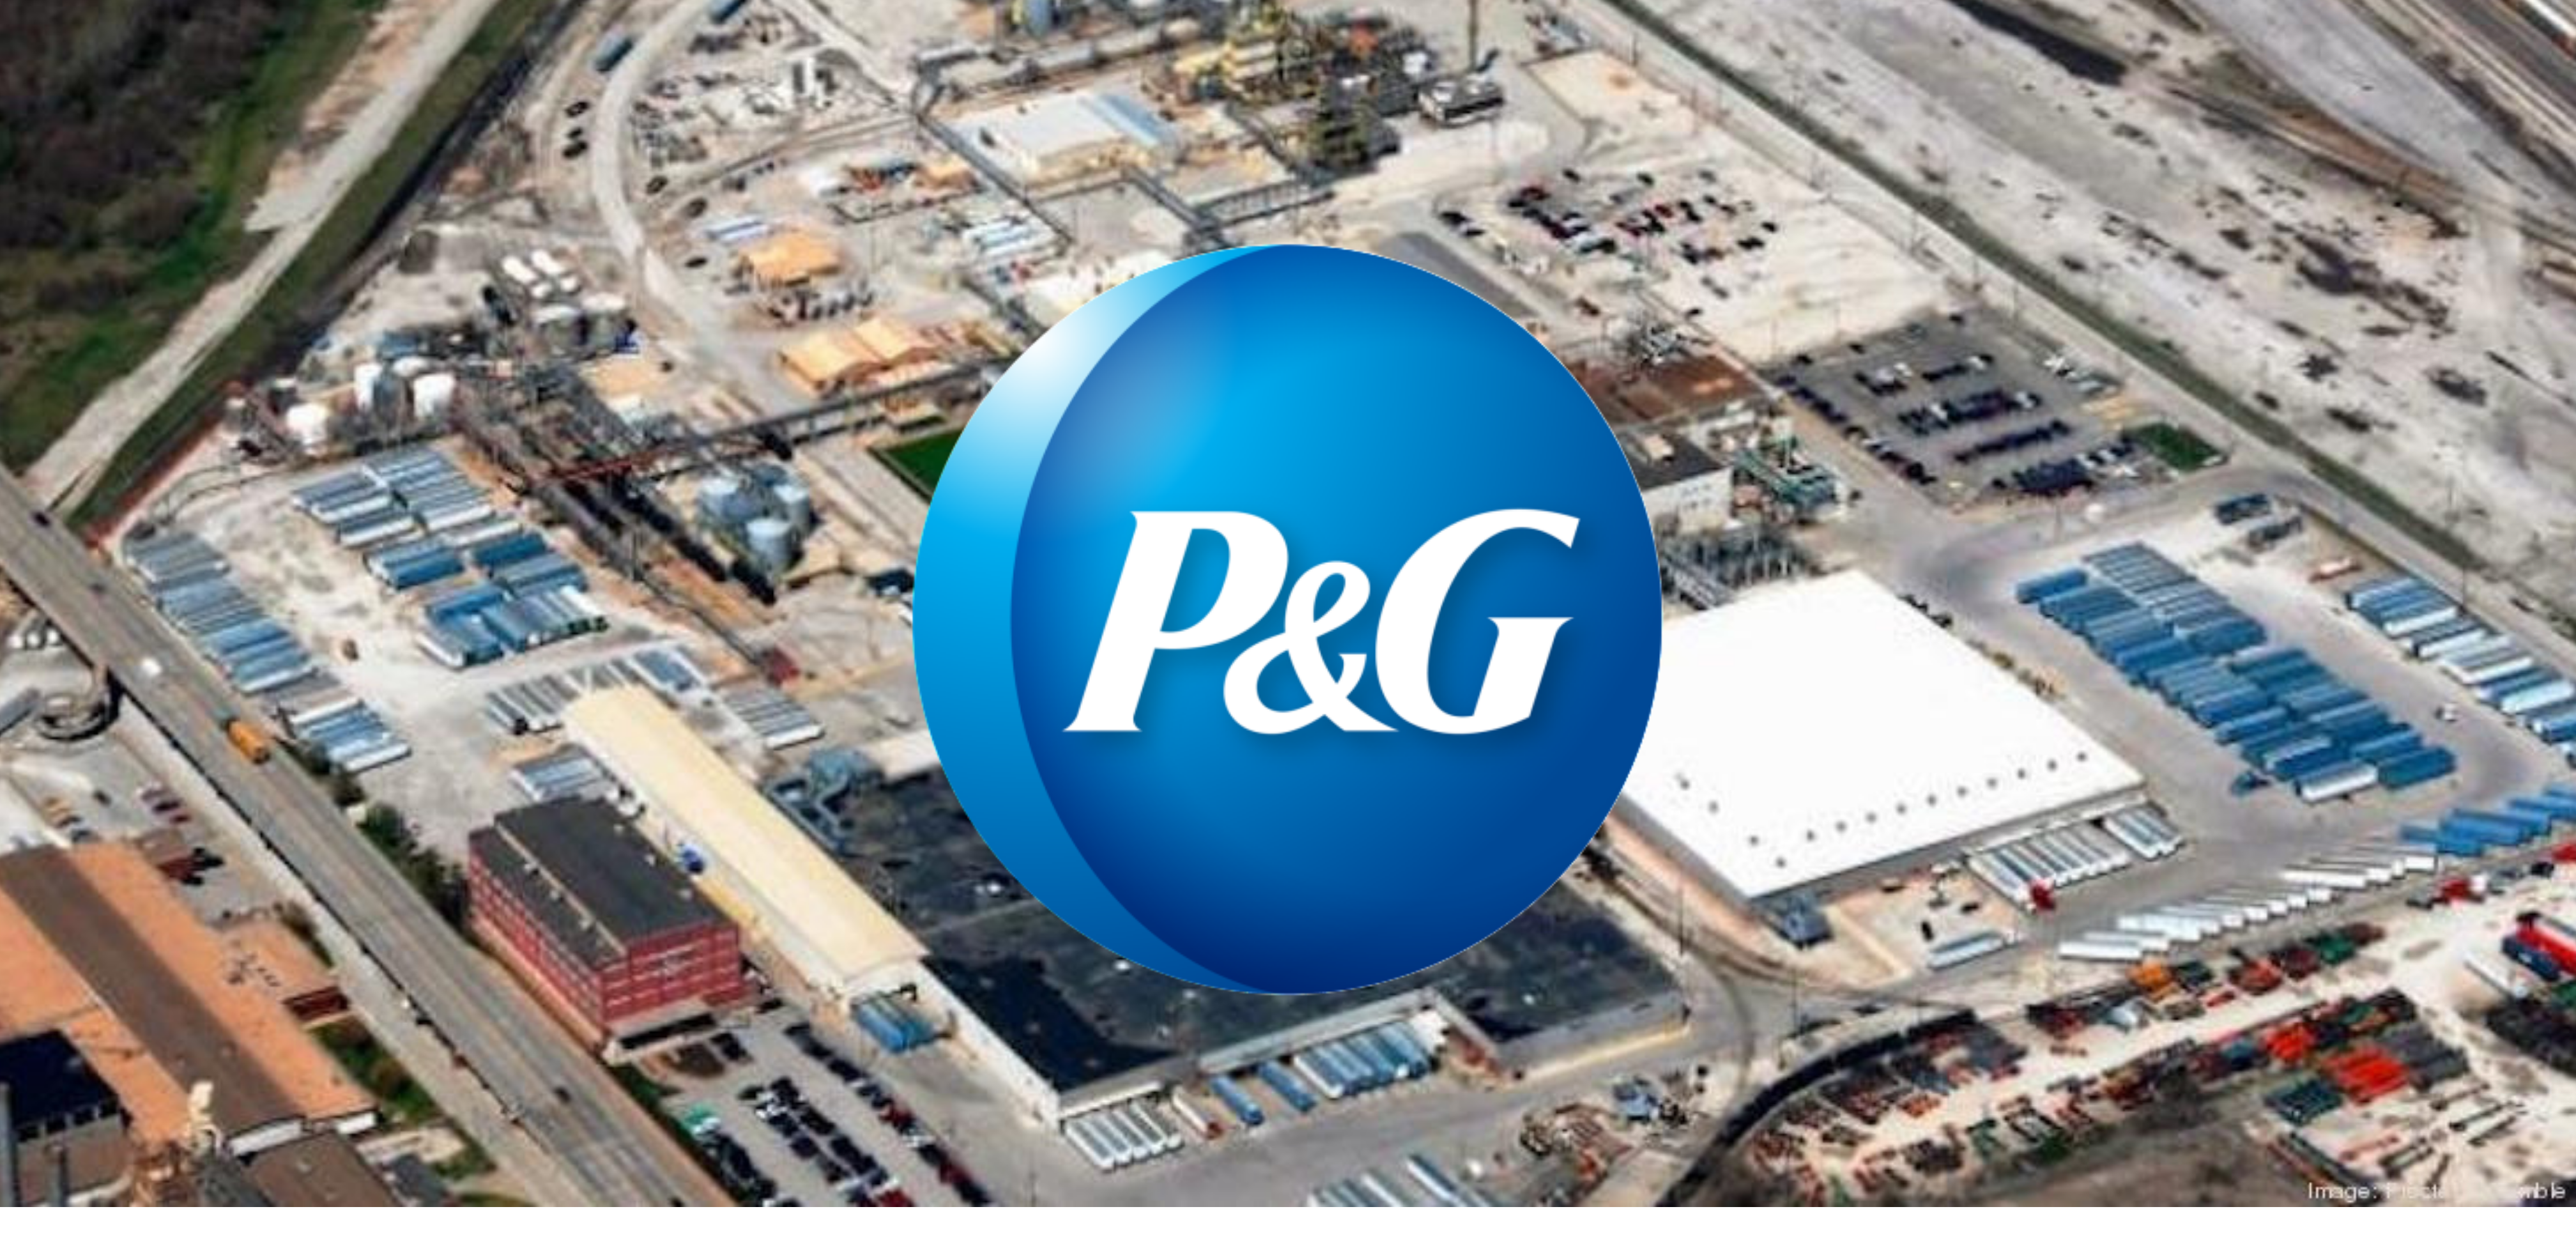 Procter and gamble